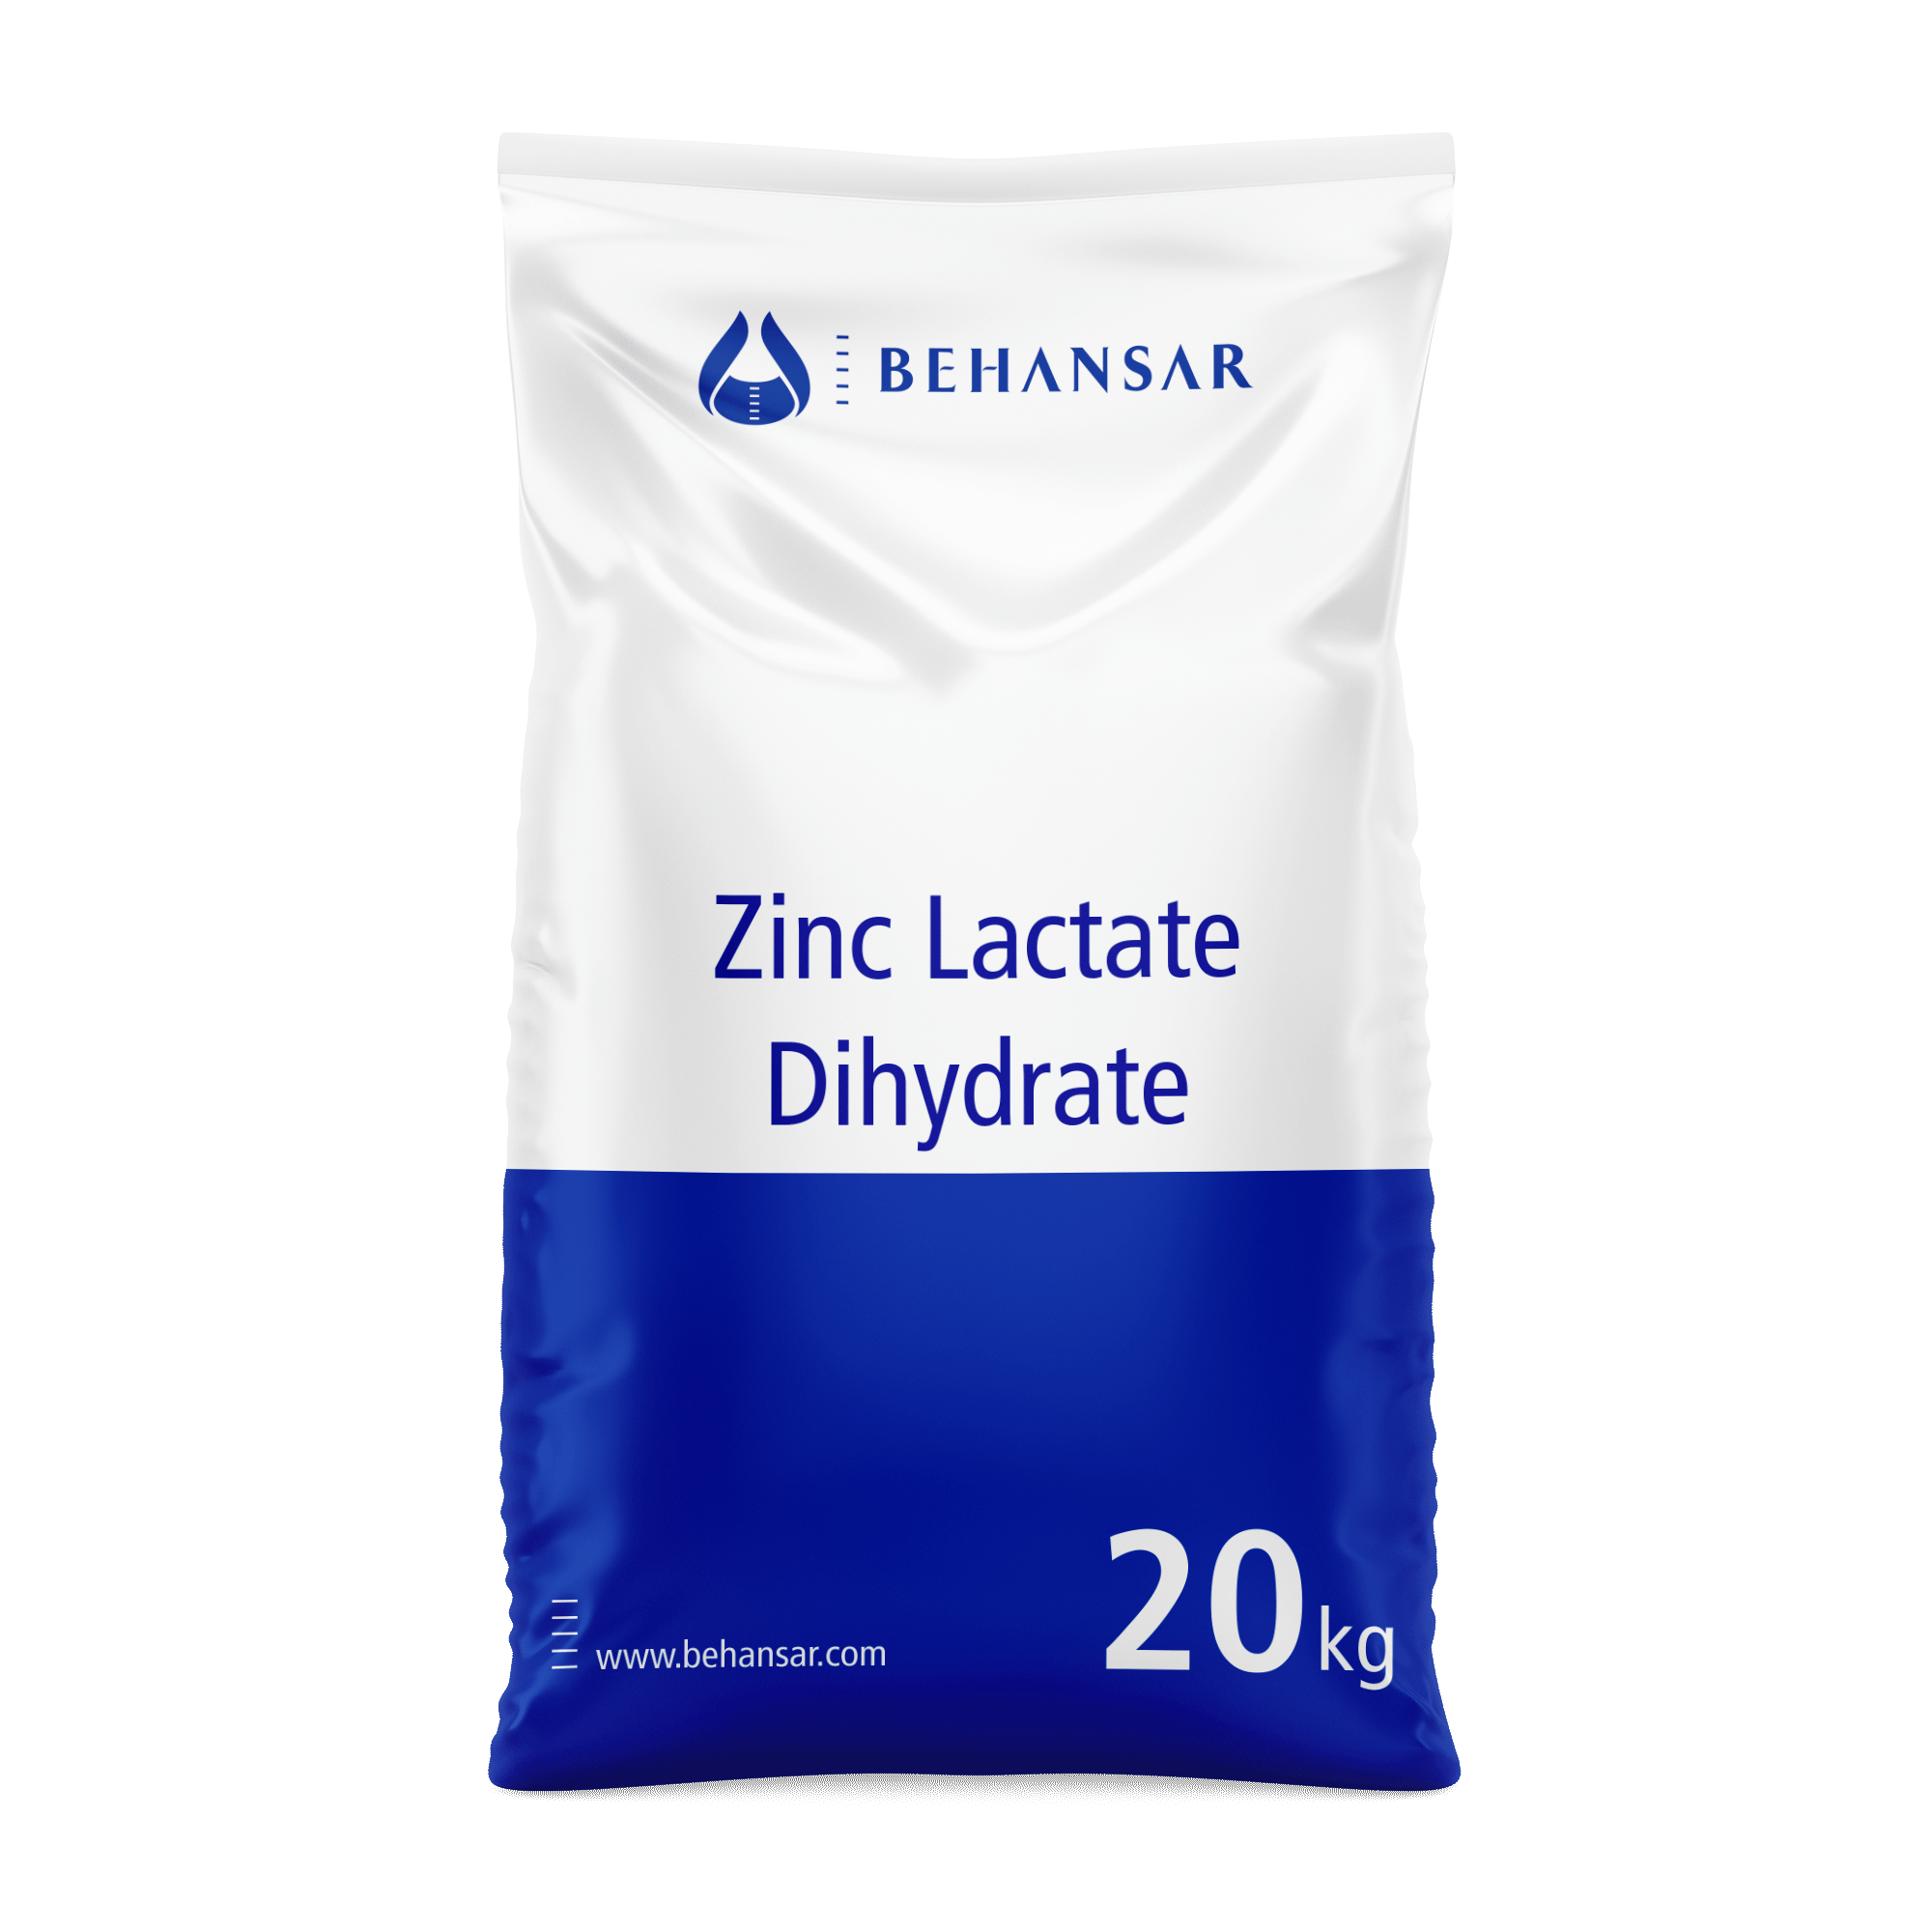 Zinc Lactate Dihydrate is one of the products of Behansar Co